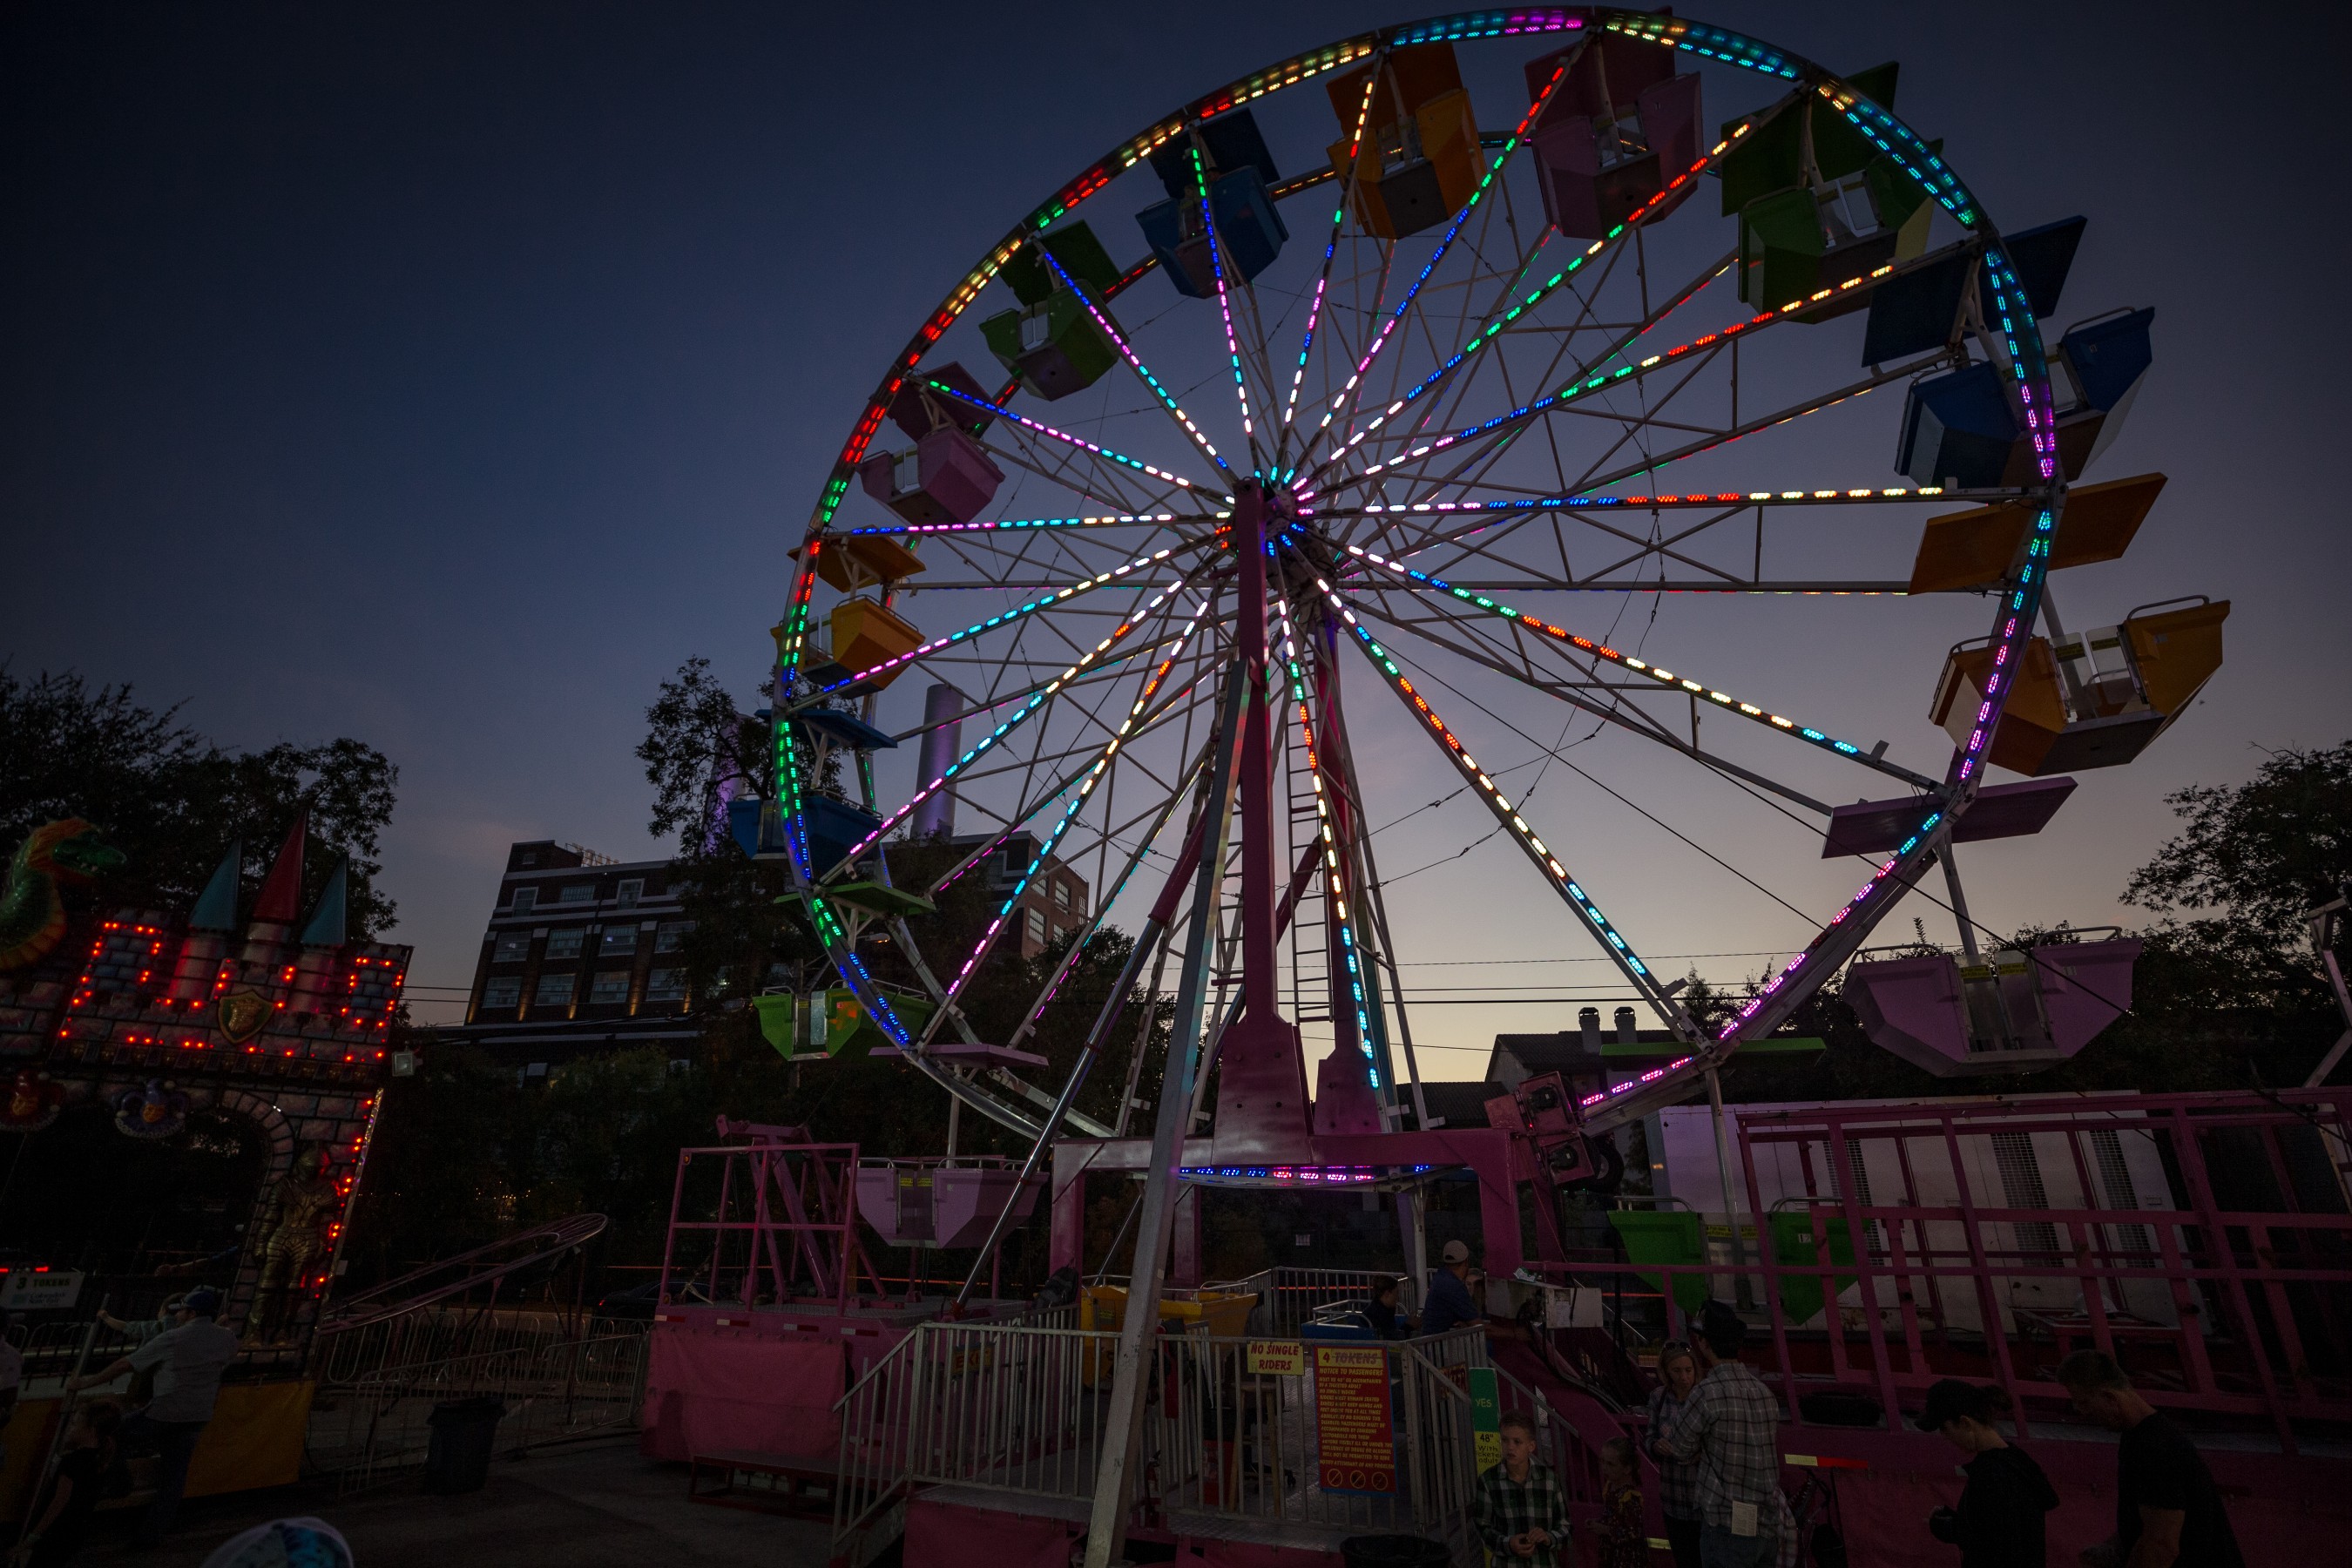 The Wurstfest carnival offers slides and rides for all ages, including the Ferris wheel, where guests get a beautiful, birds-eye view of the festival and surrounding town of New Braunfels.